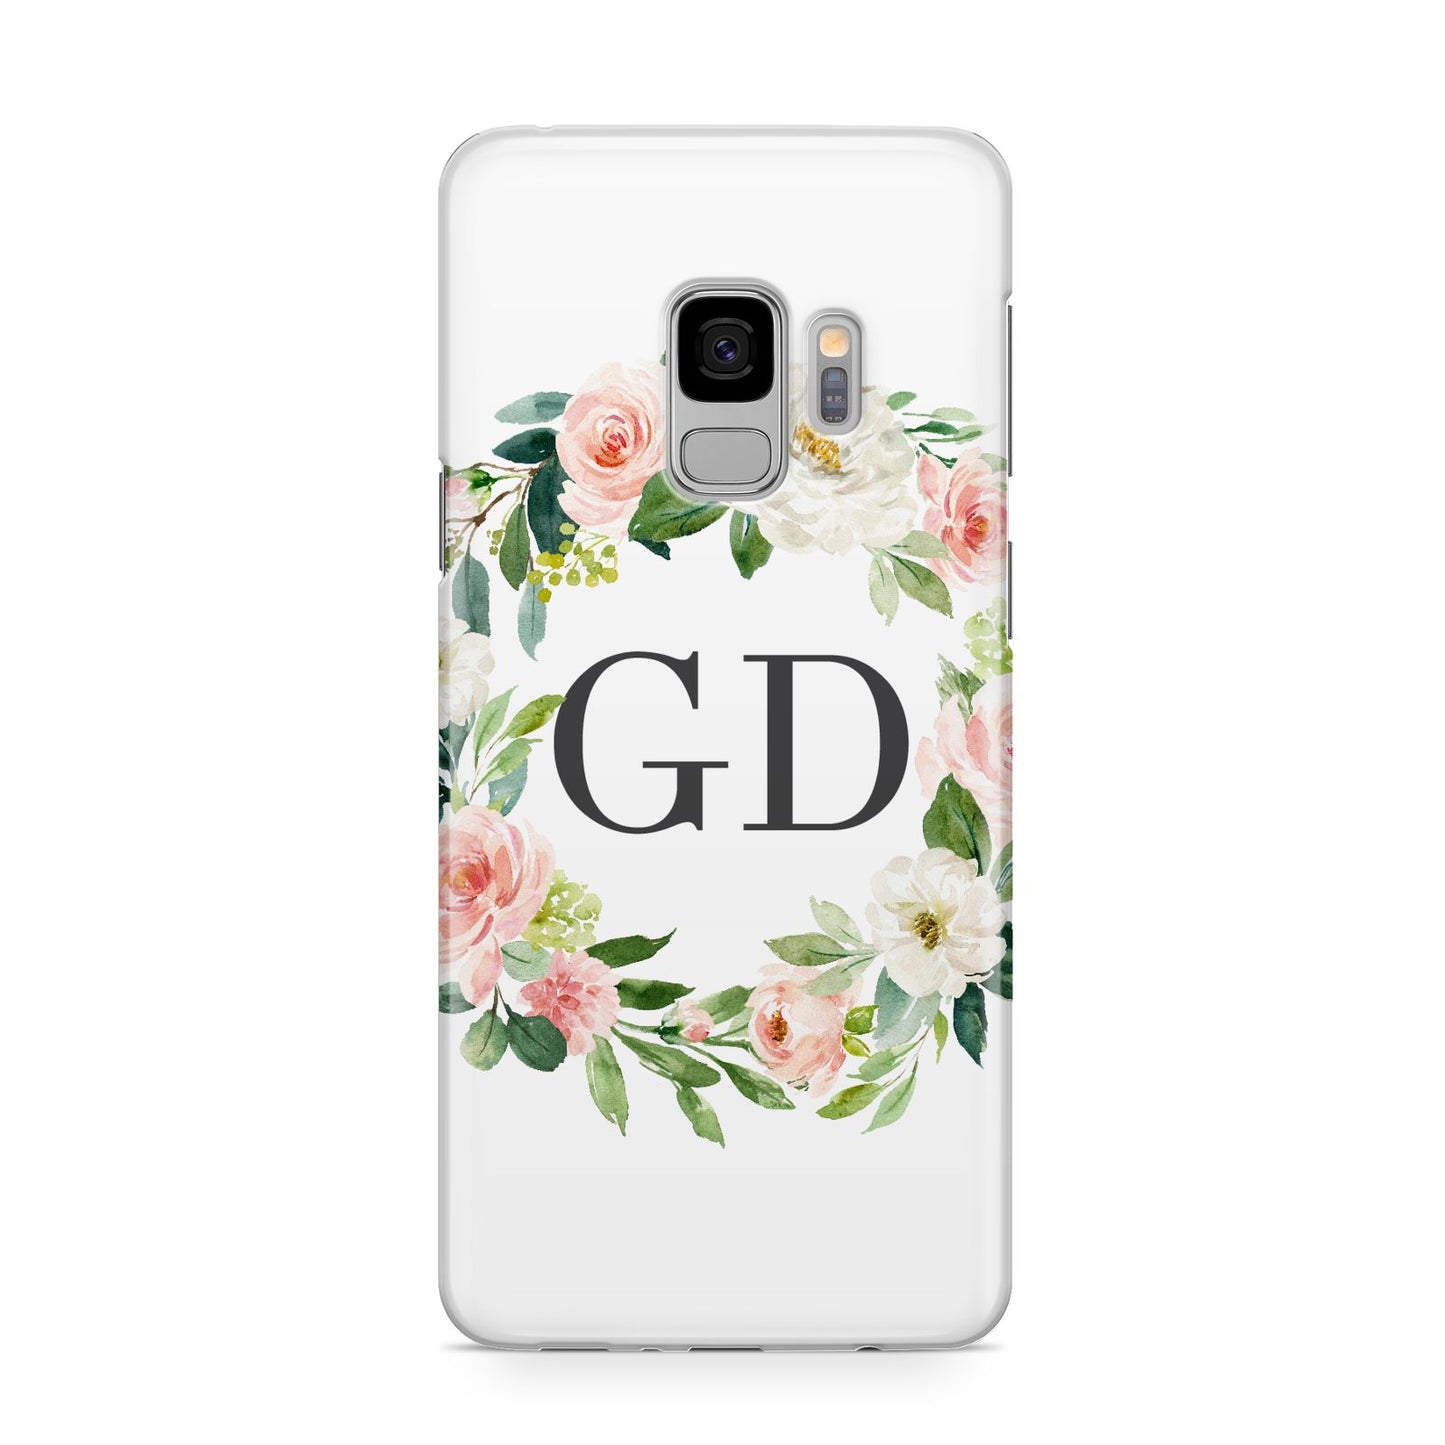 Personalised floral wreath Samsung Galaxy S9 Case